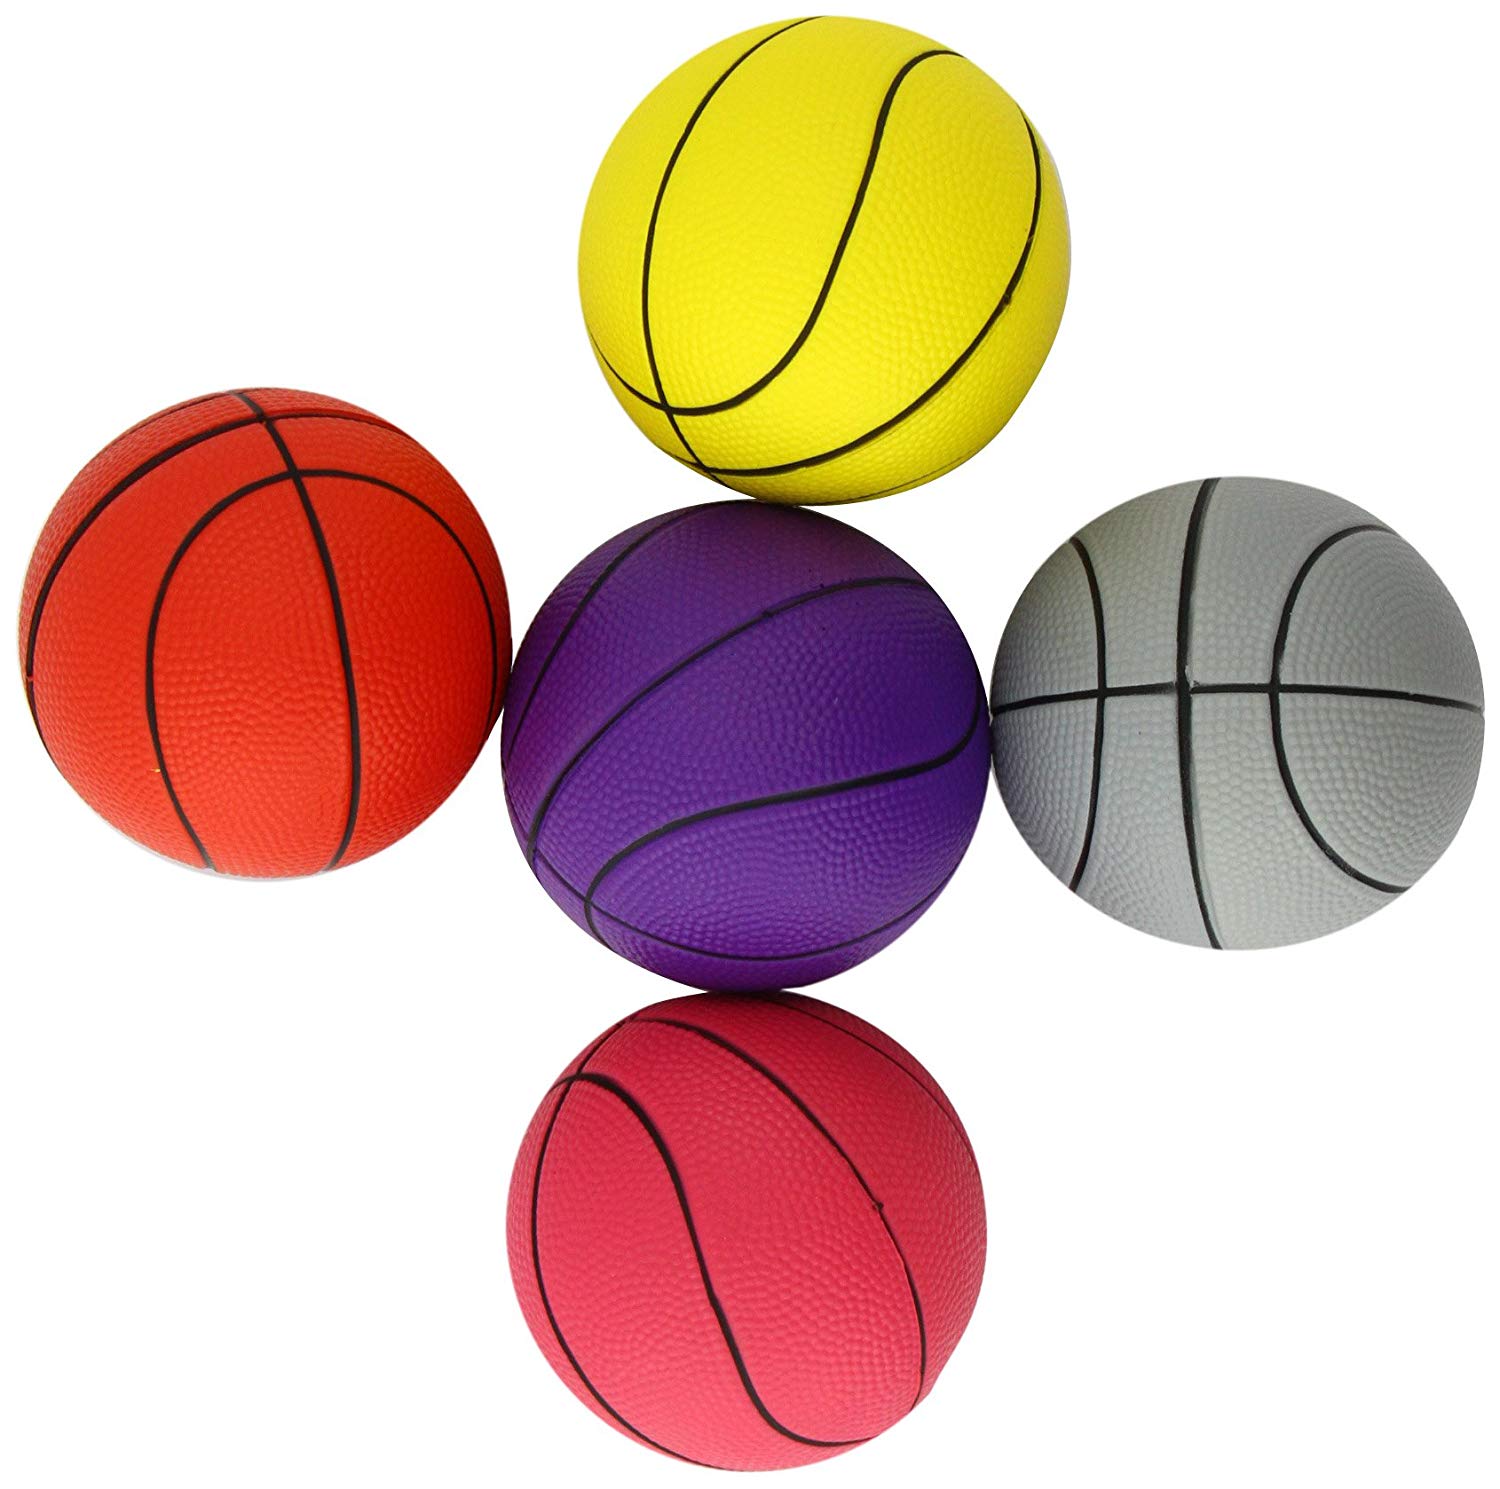 Nobby Foam Rubber Basketballs Assorted Colors | Buy Balls at ...